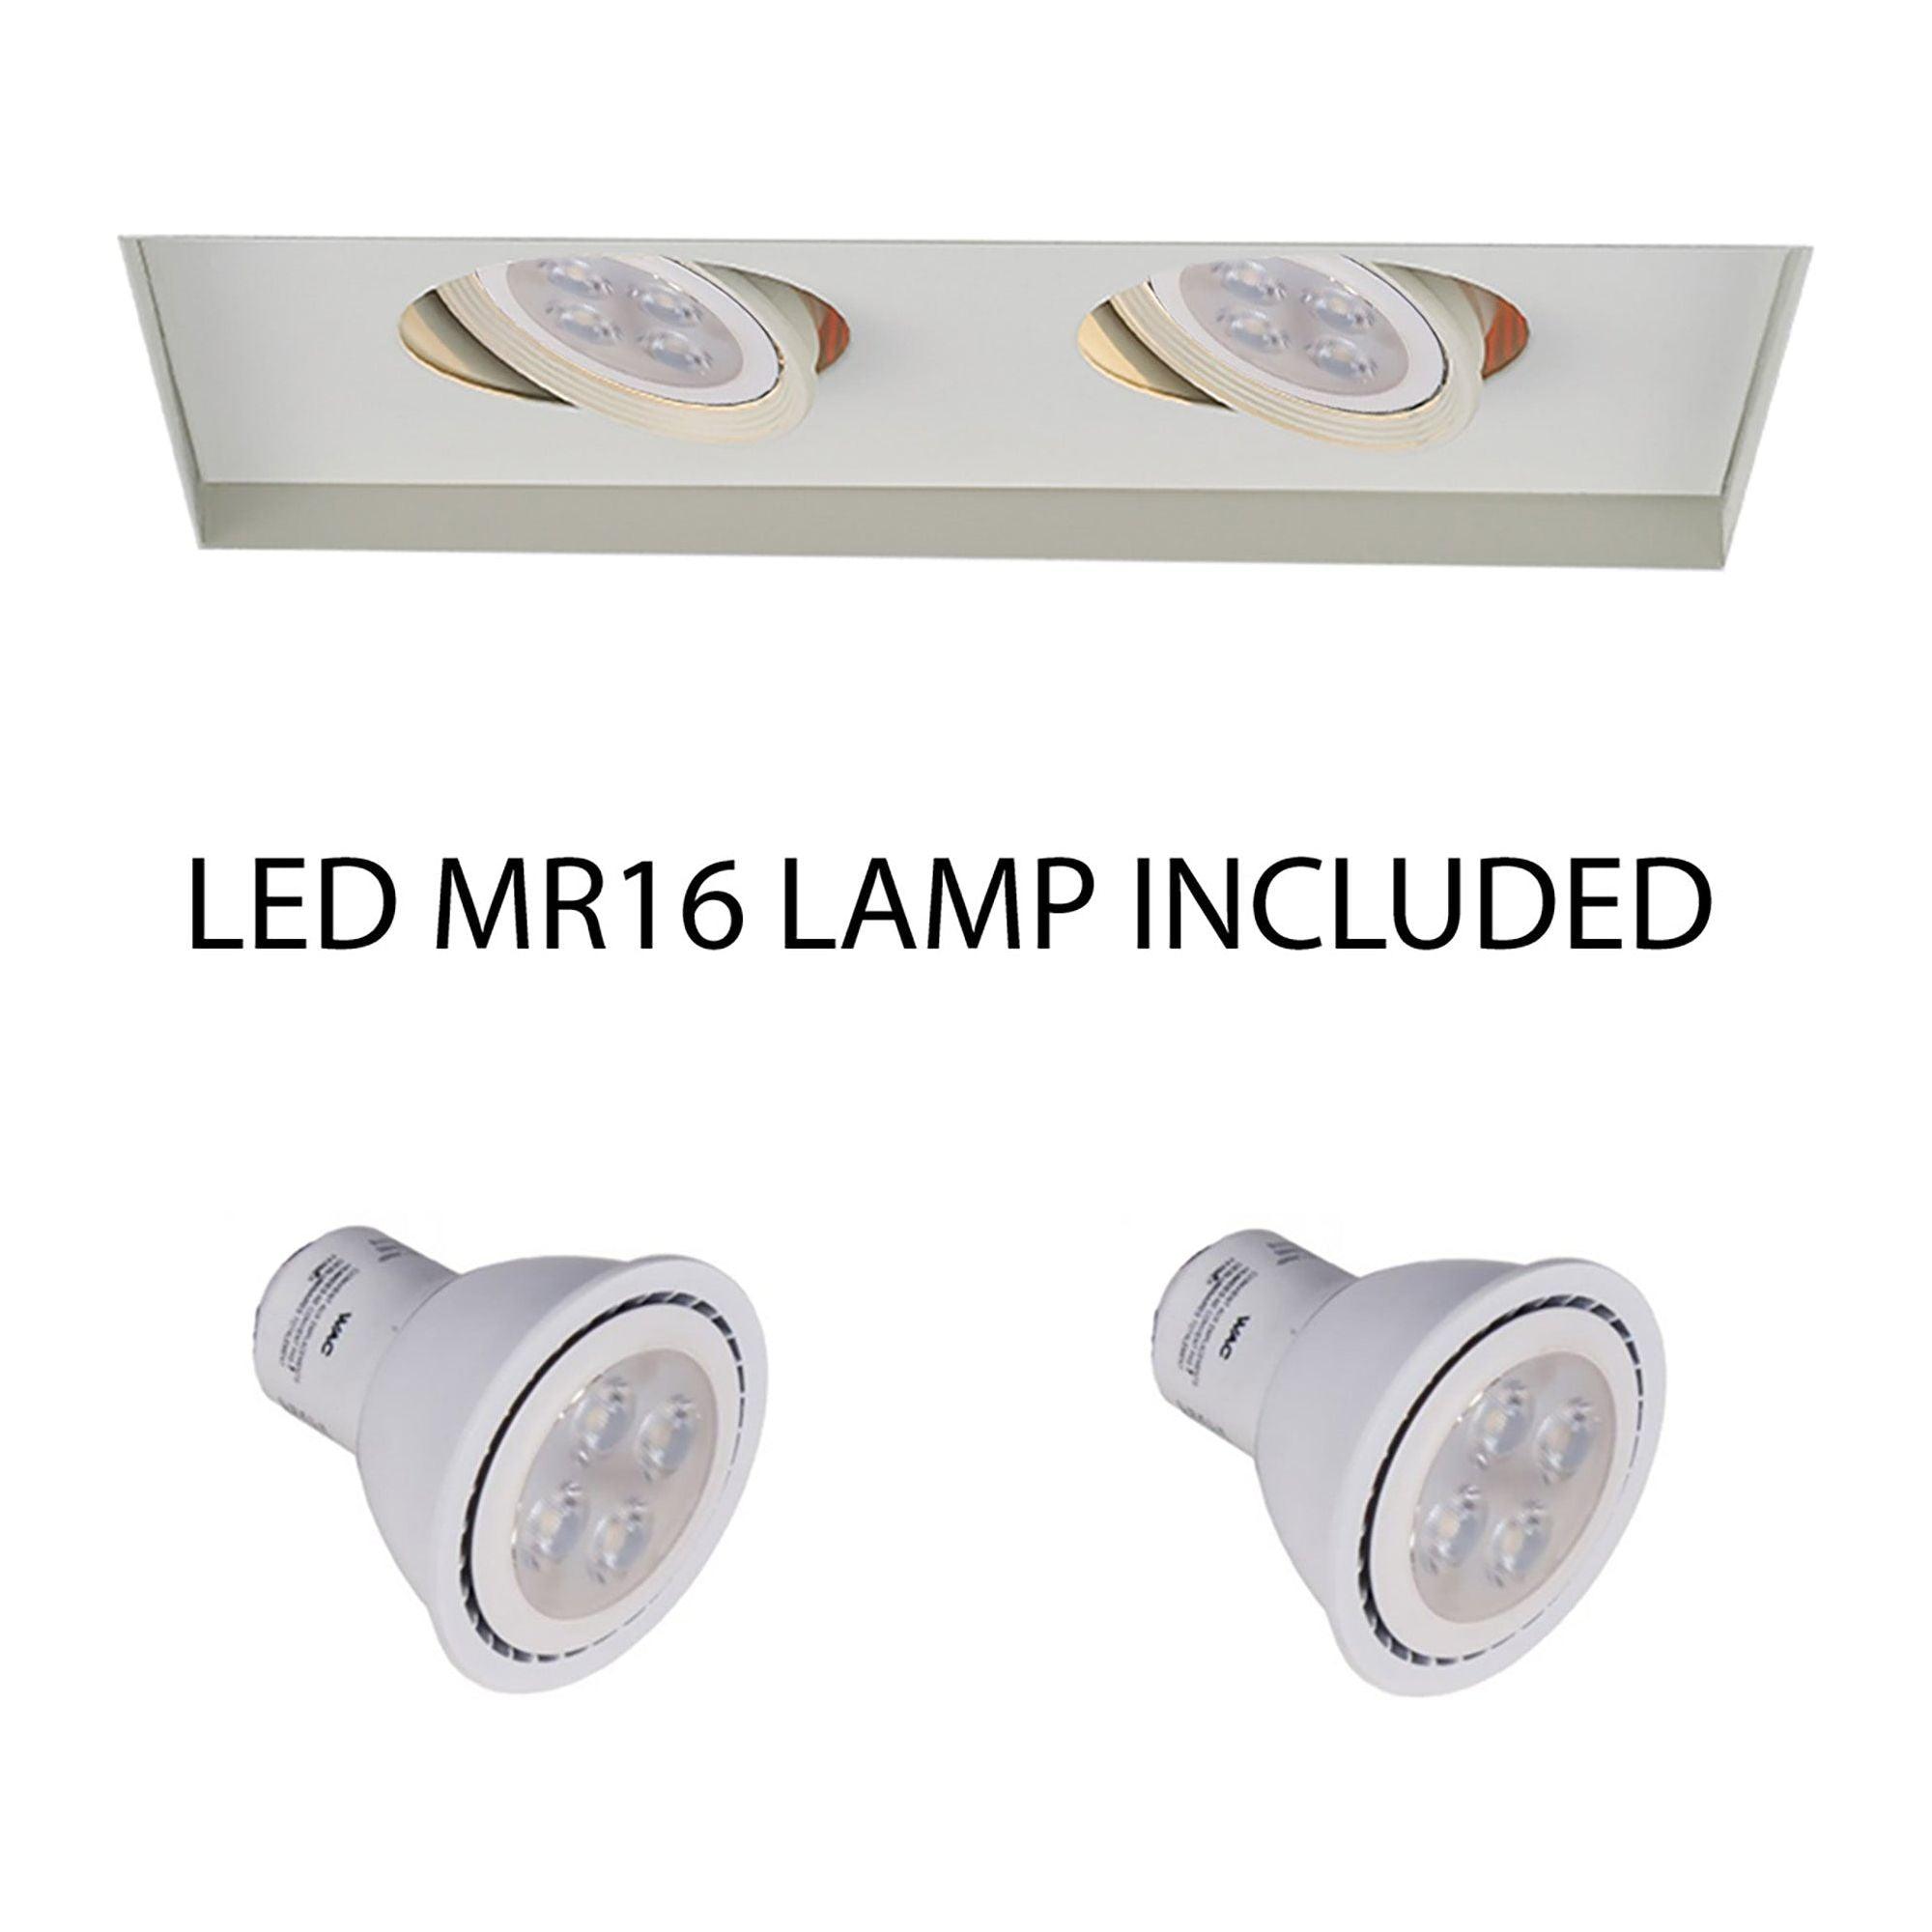 WAC Lighting - Low Voltage Multiple Two Light Invisible Trim with LED Bulb - Lights Canada